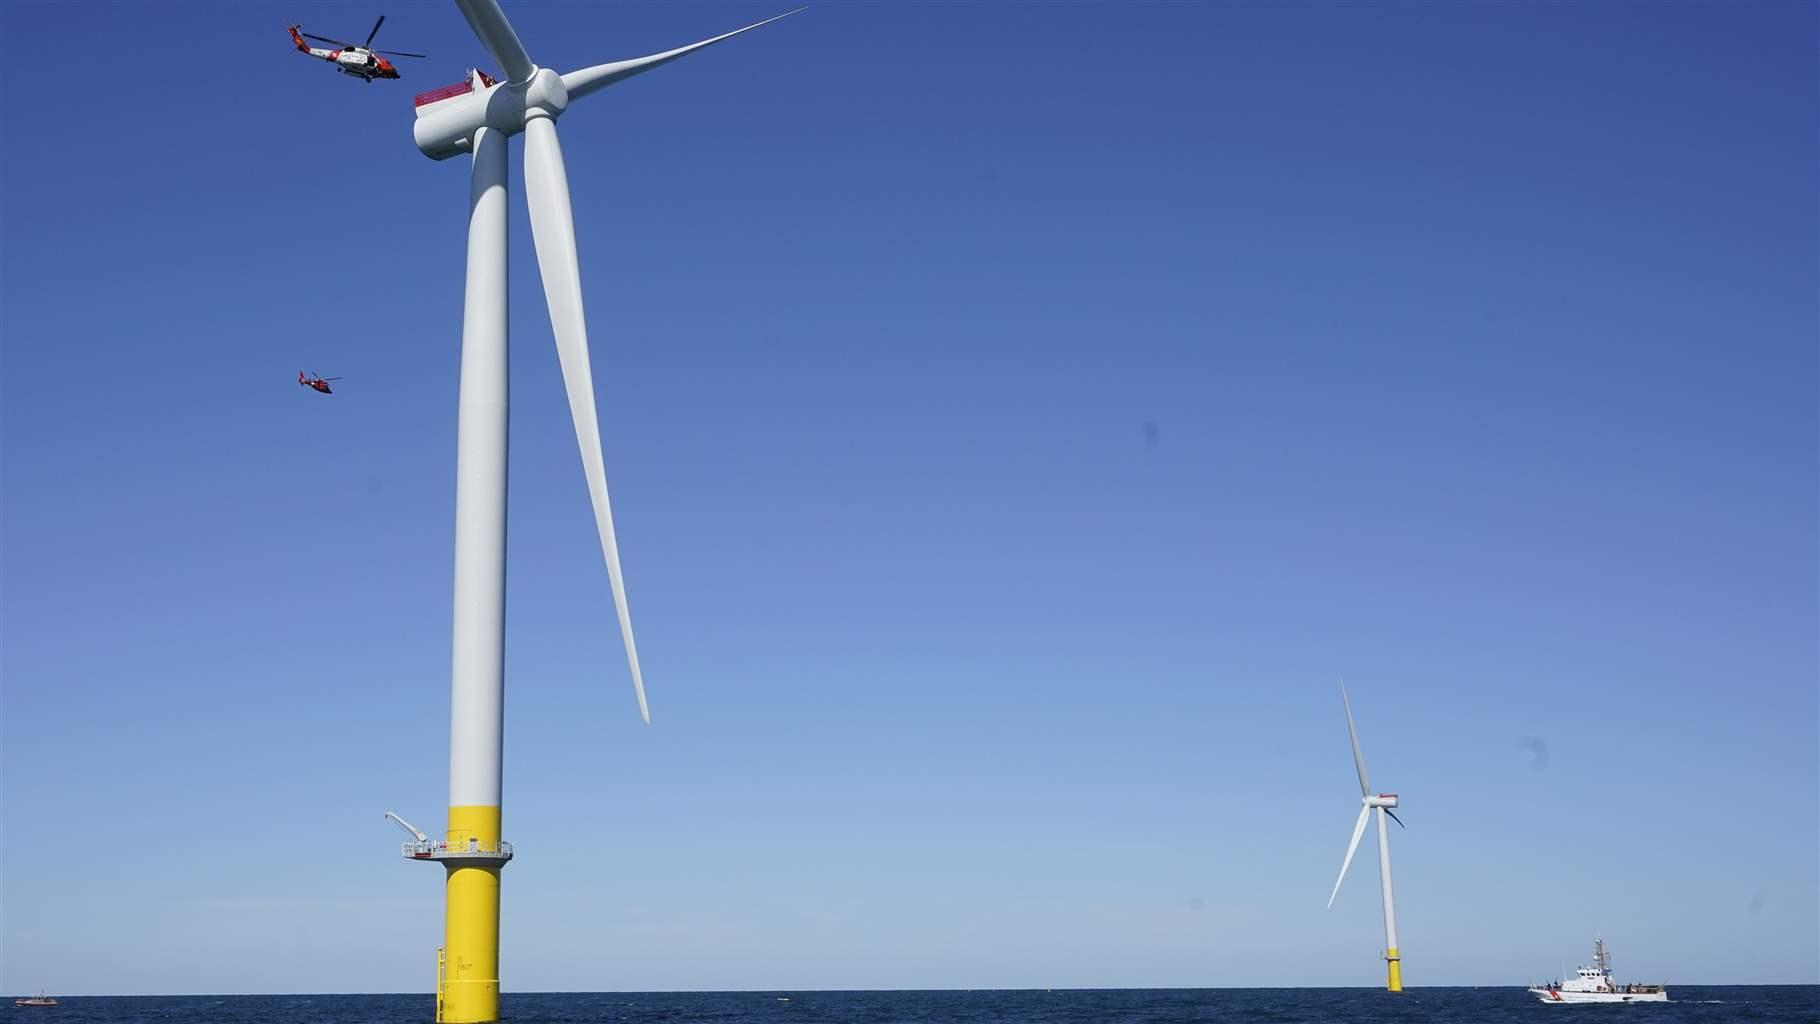 A U.S. Coast Guard helicopter and ship approach two wind turbines in clear ocean waters under sunny blue skies.